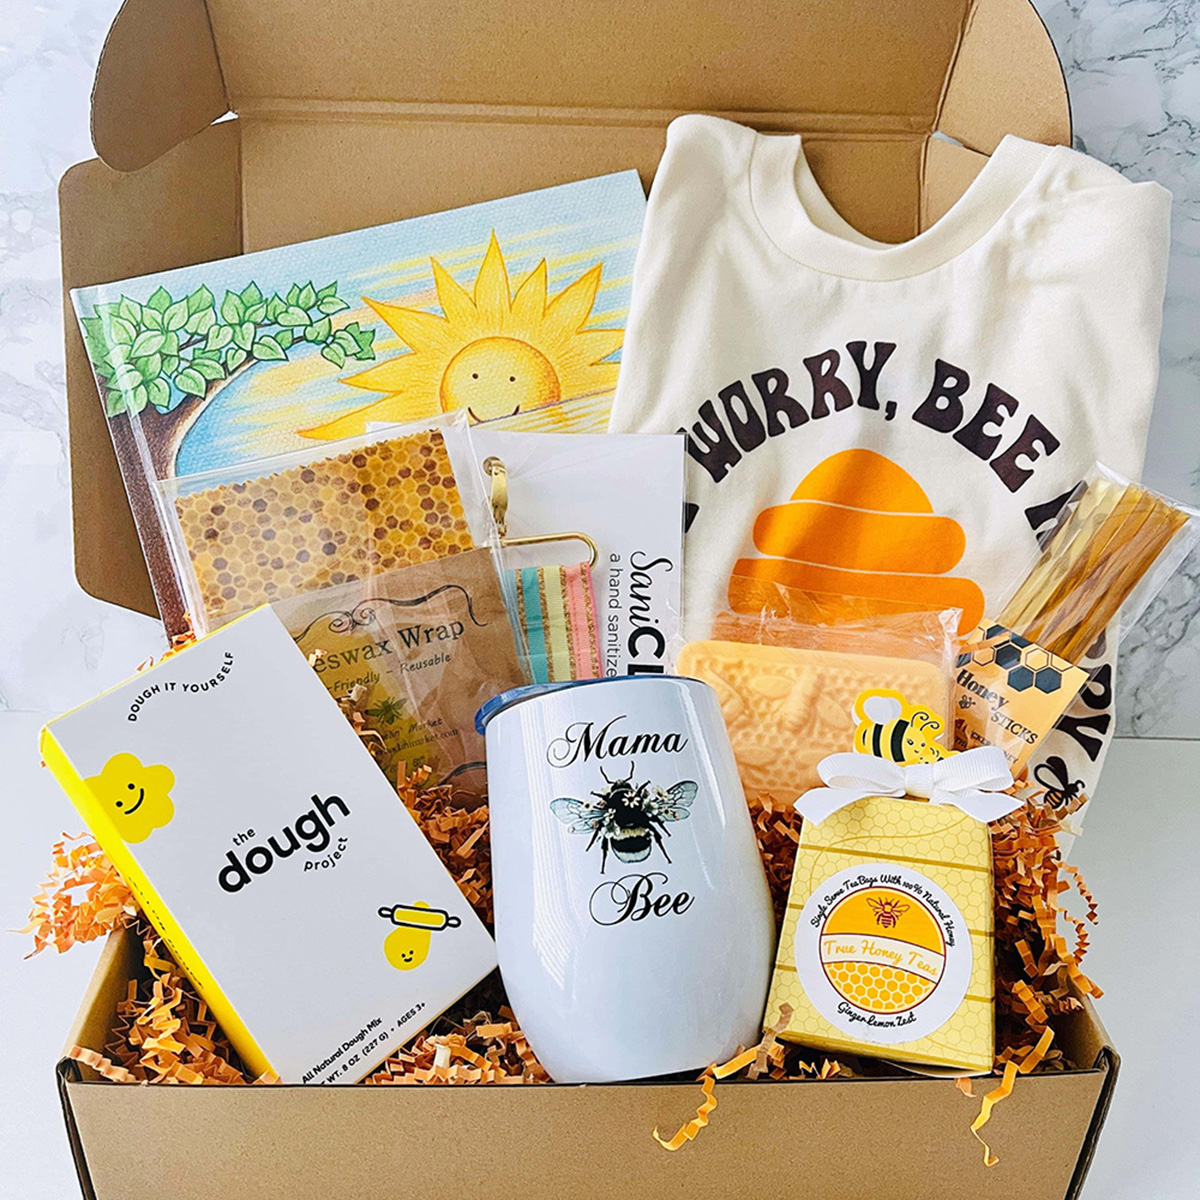 12 Of The Best Subscription Boxes Make The Best On-Going Gifts For Everyone